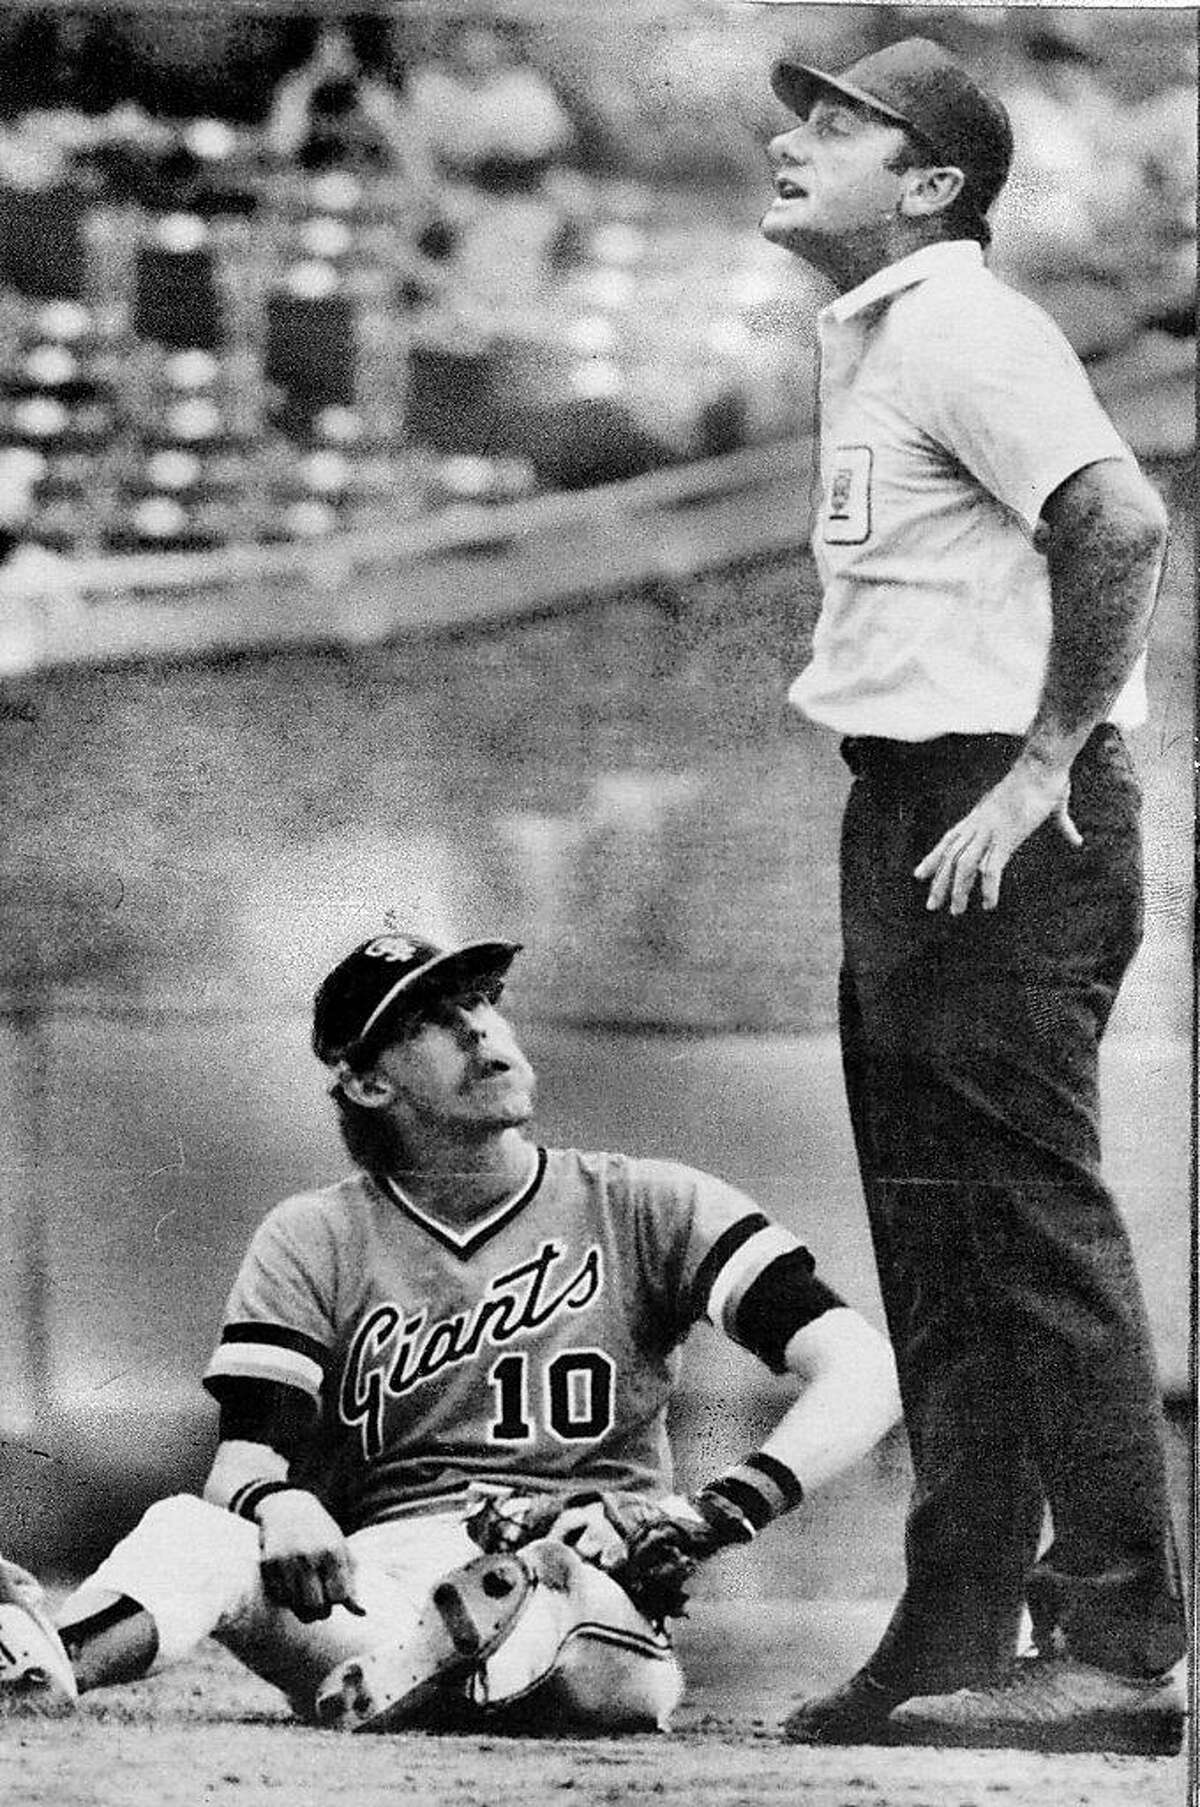 San Francisco shortstop Johnnie LeMaster disputes call at second base with second base umpire Andy Olsen in the fourth inning of game with Chicago Cubs in Chicago.